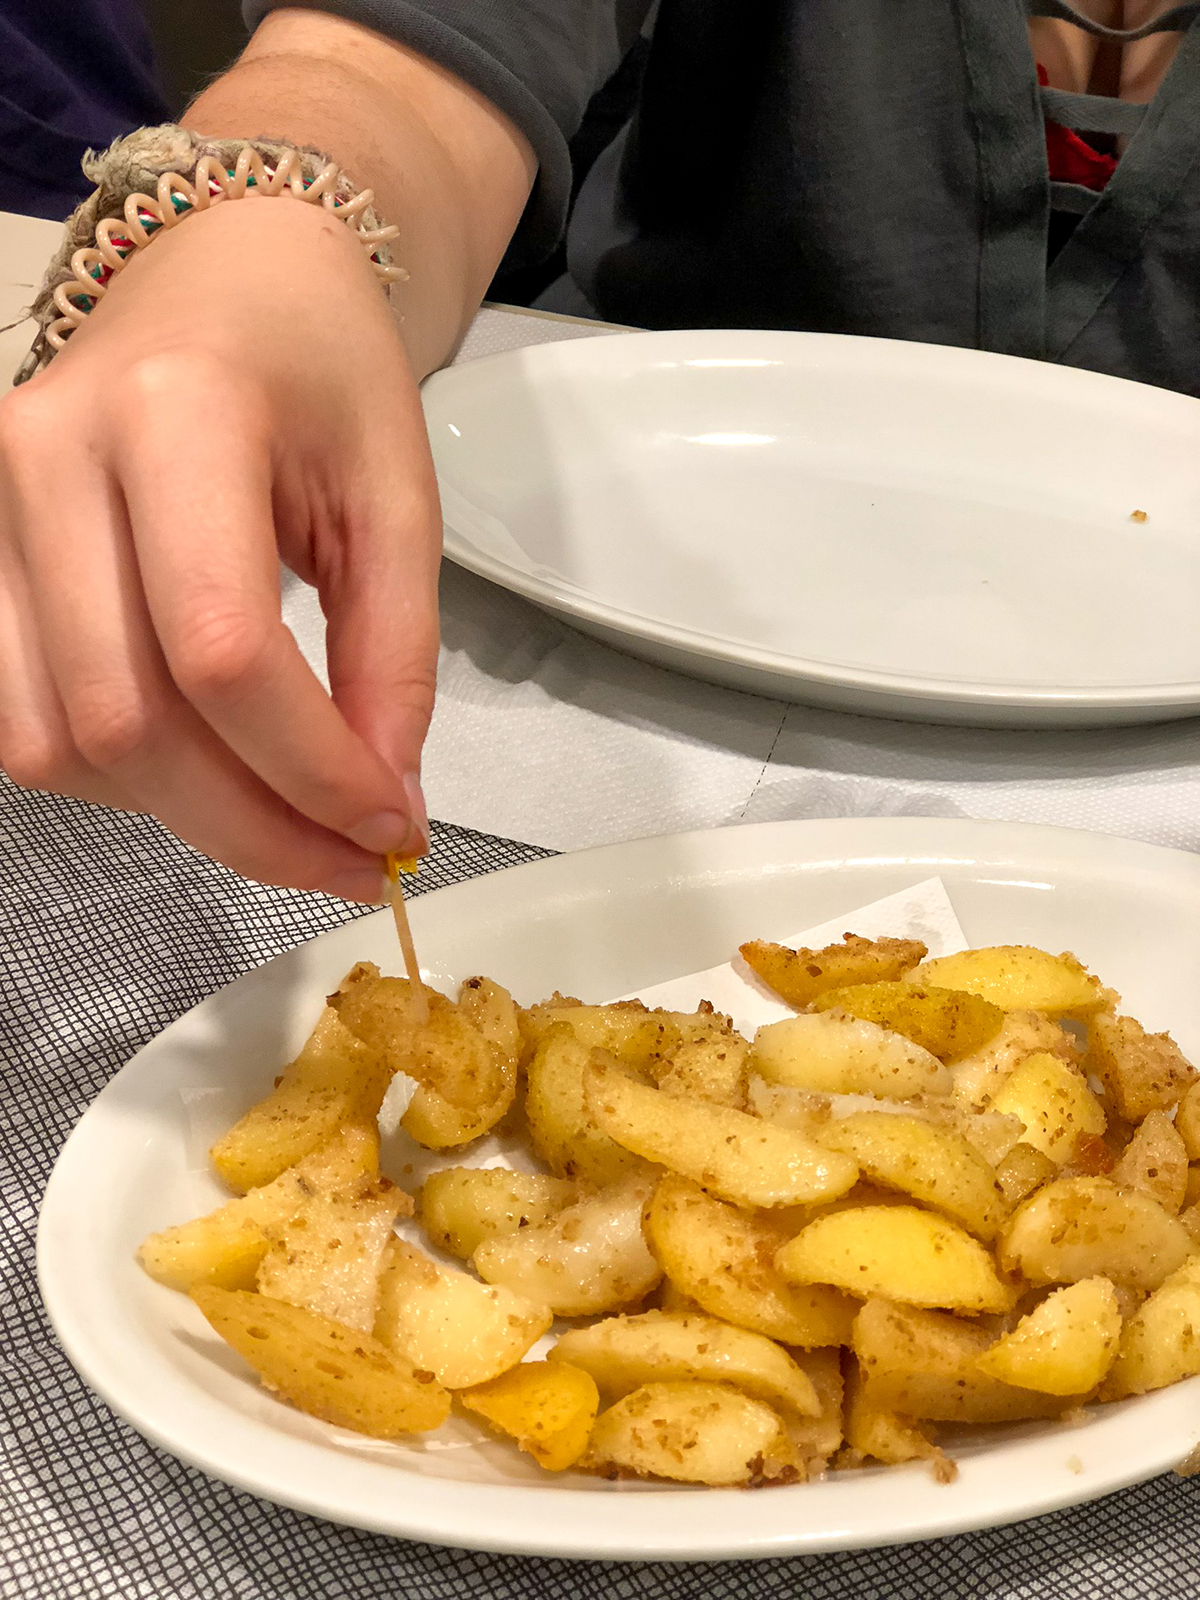 A hand reaches to pick up a small piece of potato from a white plate of potatoes.